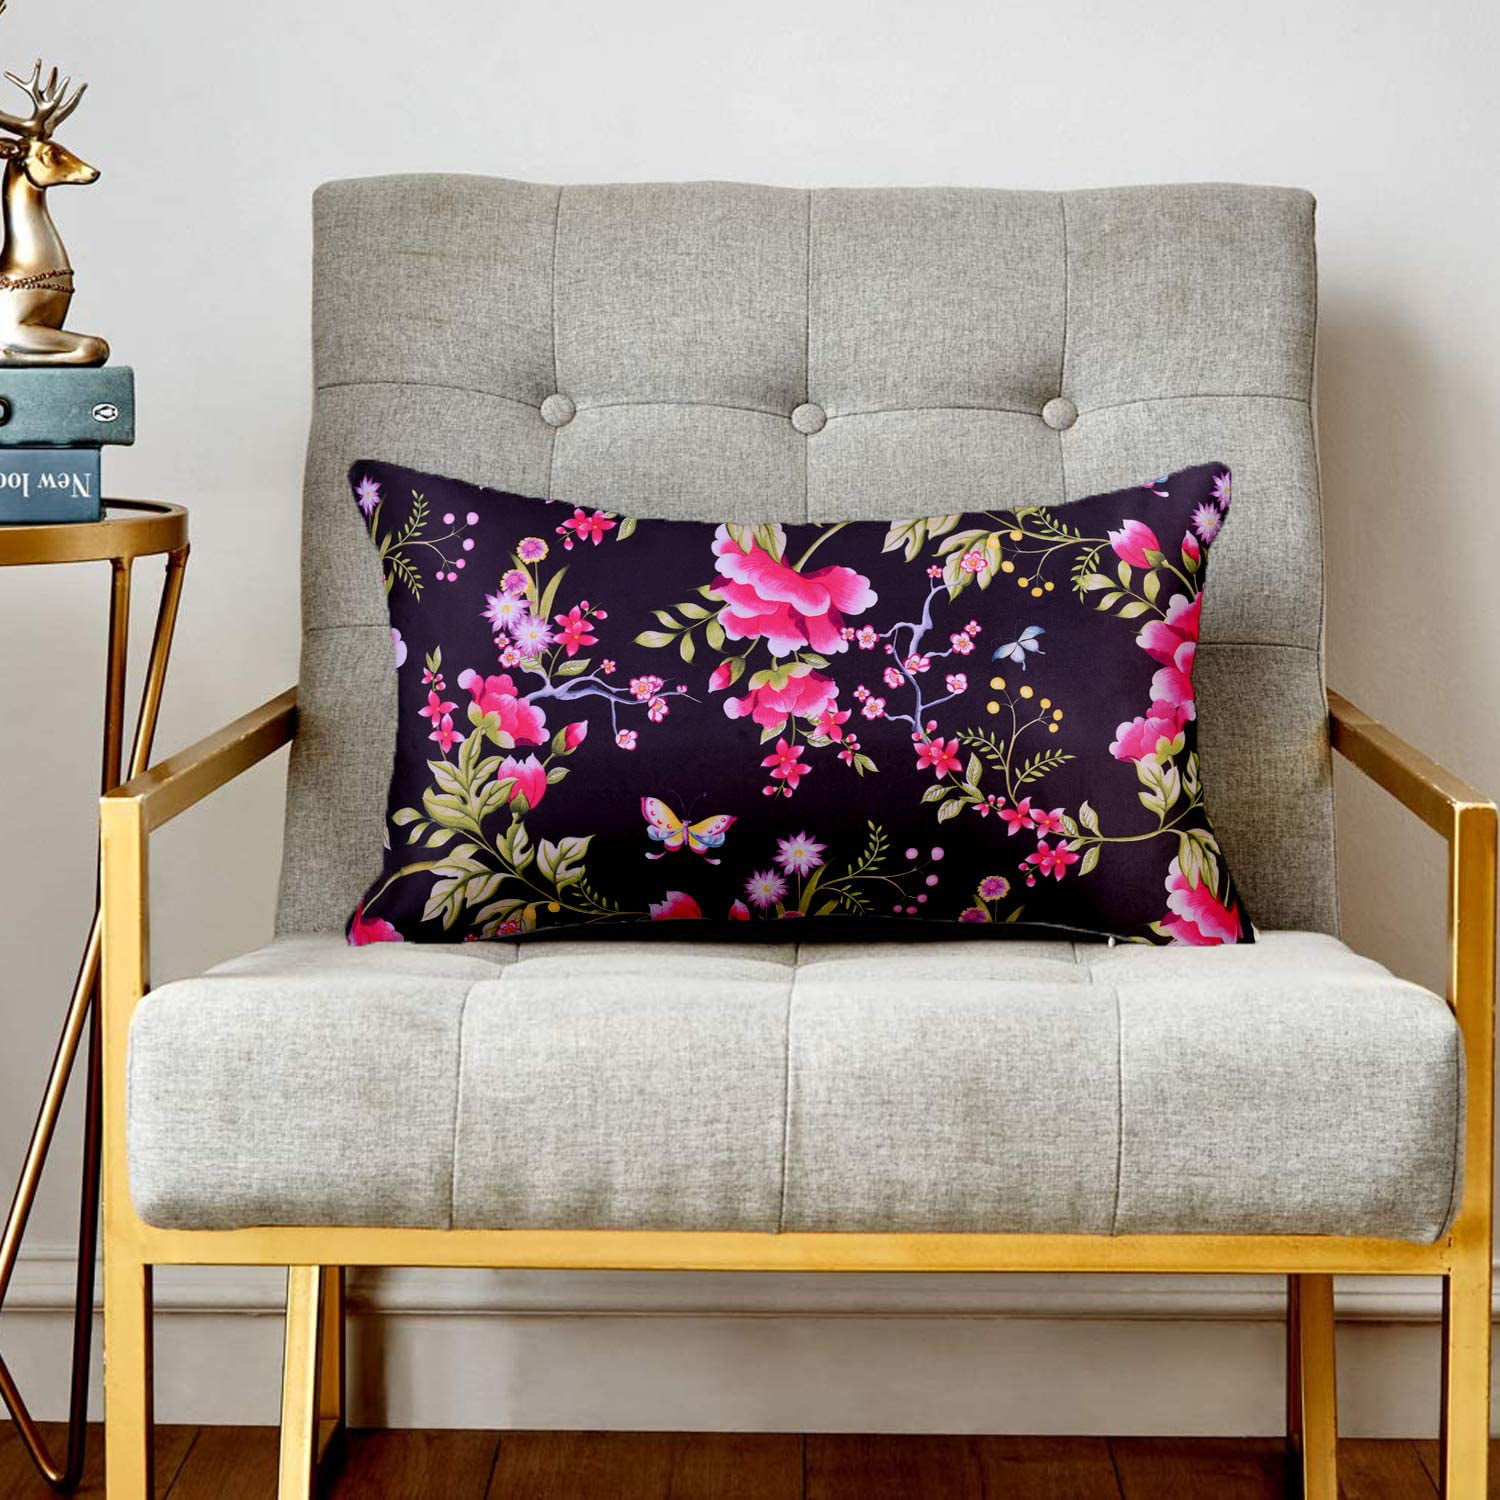 Decozen Decorative Floral Printed Throw Pillow 14 x 20 inches with ...